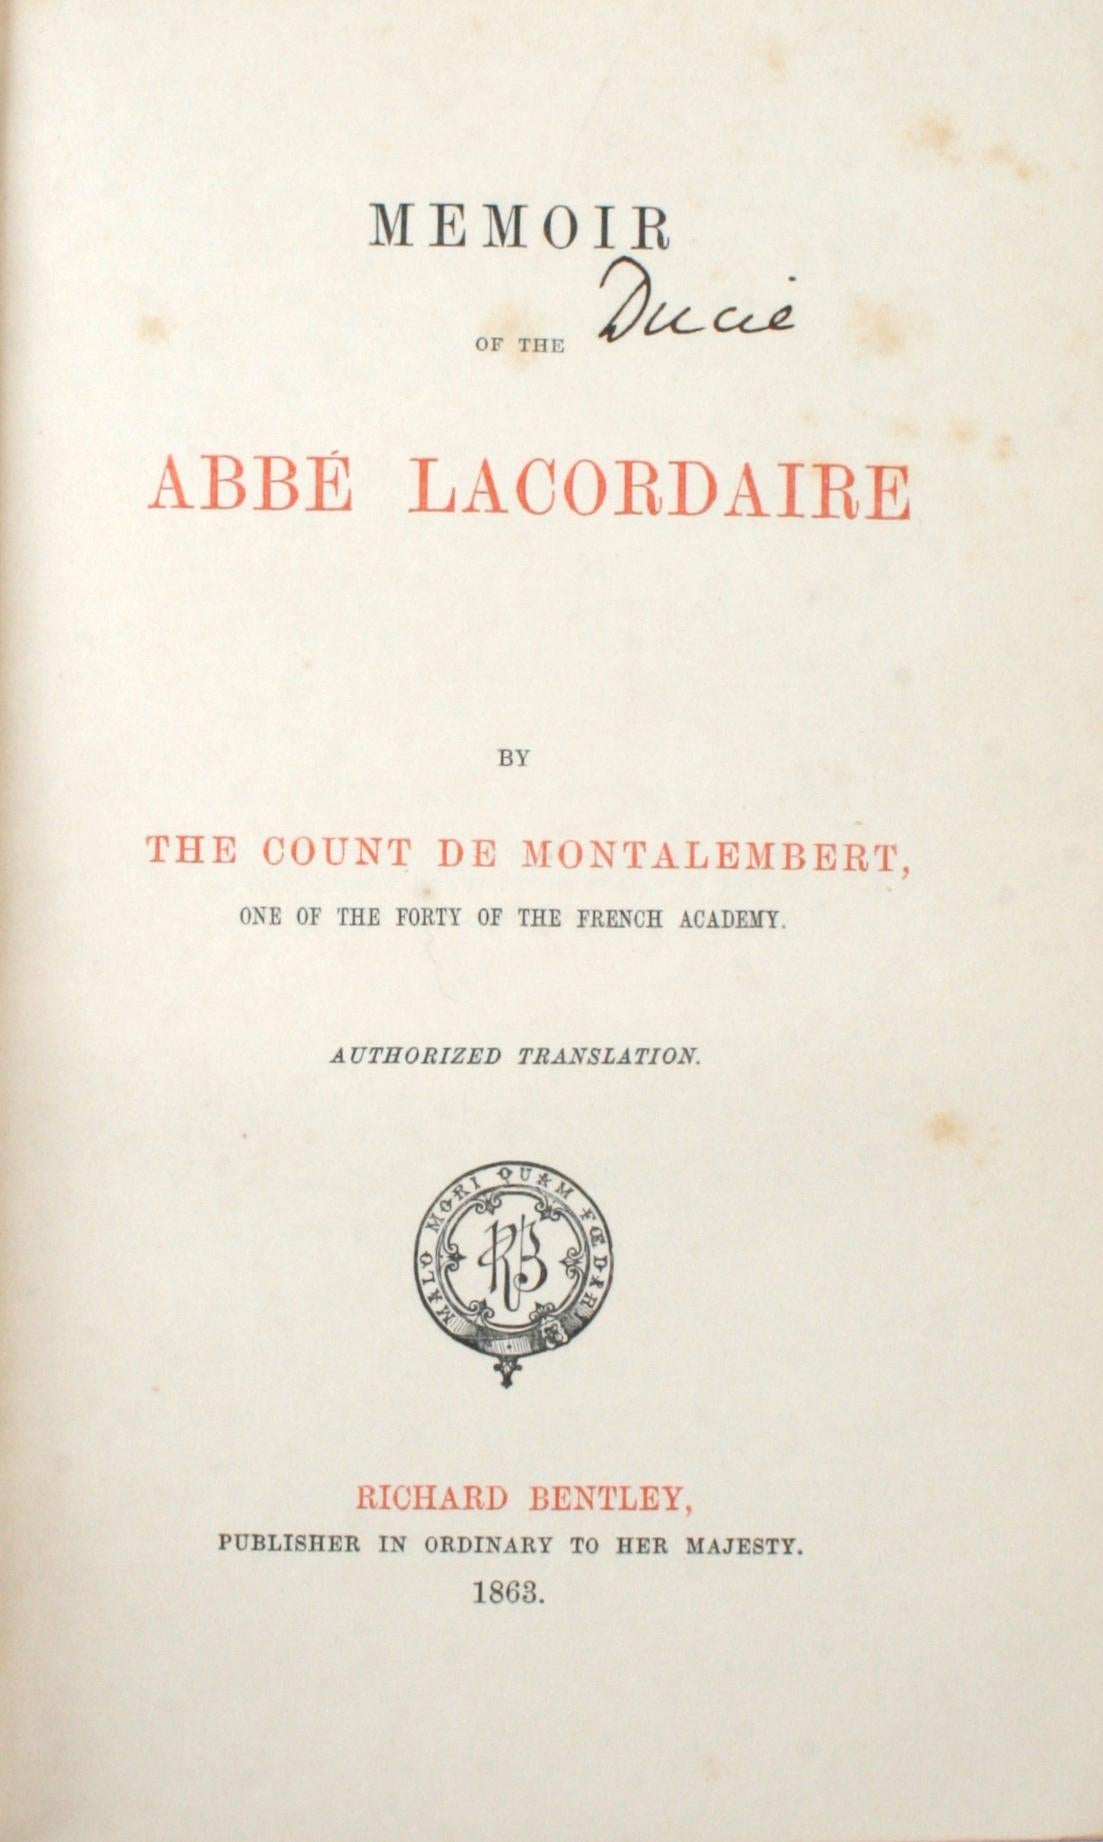 Memoir of the Abbé Lacordaire by The Count de Montalembert, One of The Forty of The French Academy. London: Richard Bentley, 1863. Morocco and cloth bound first edition hardcover. 311 pp. An antique memoir about Abbé Lacordaire written by his good